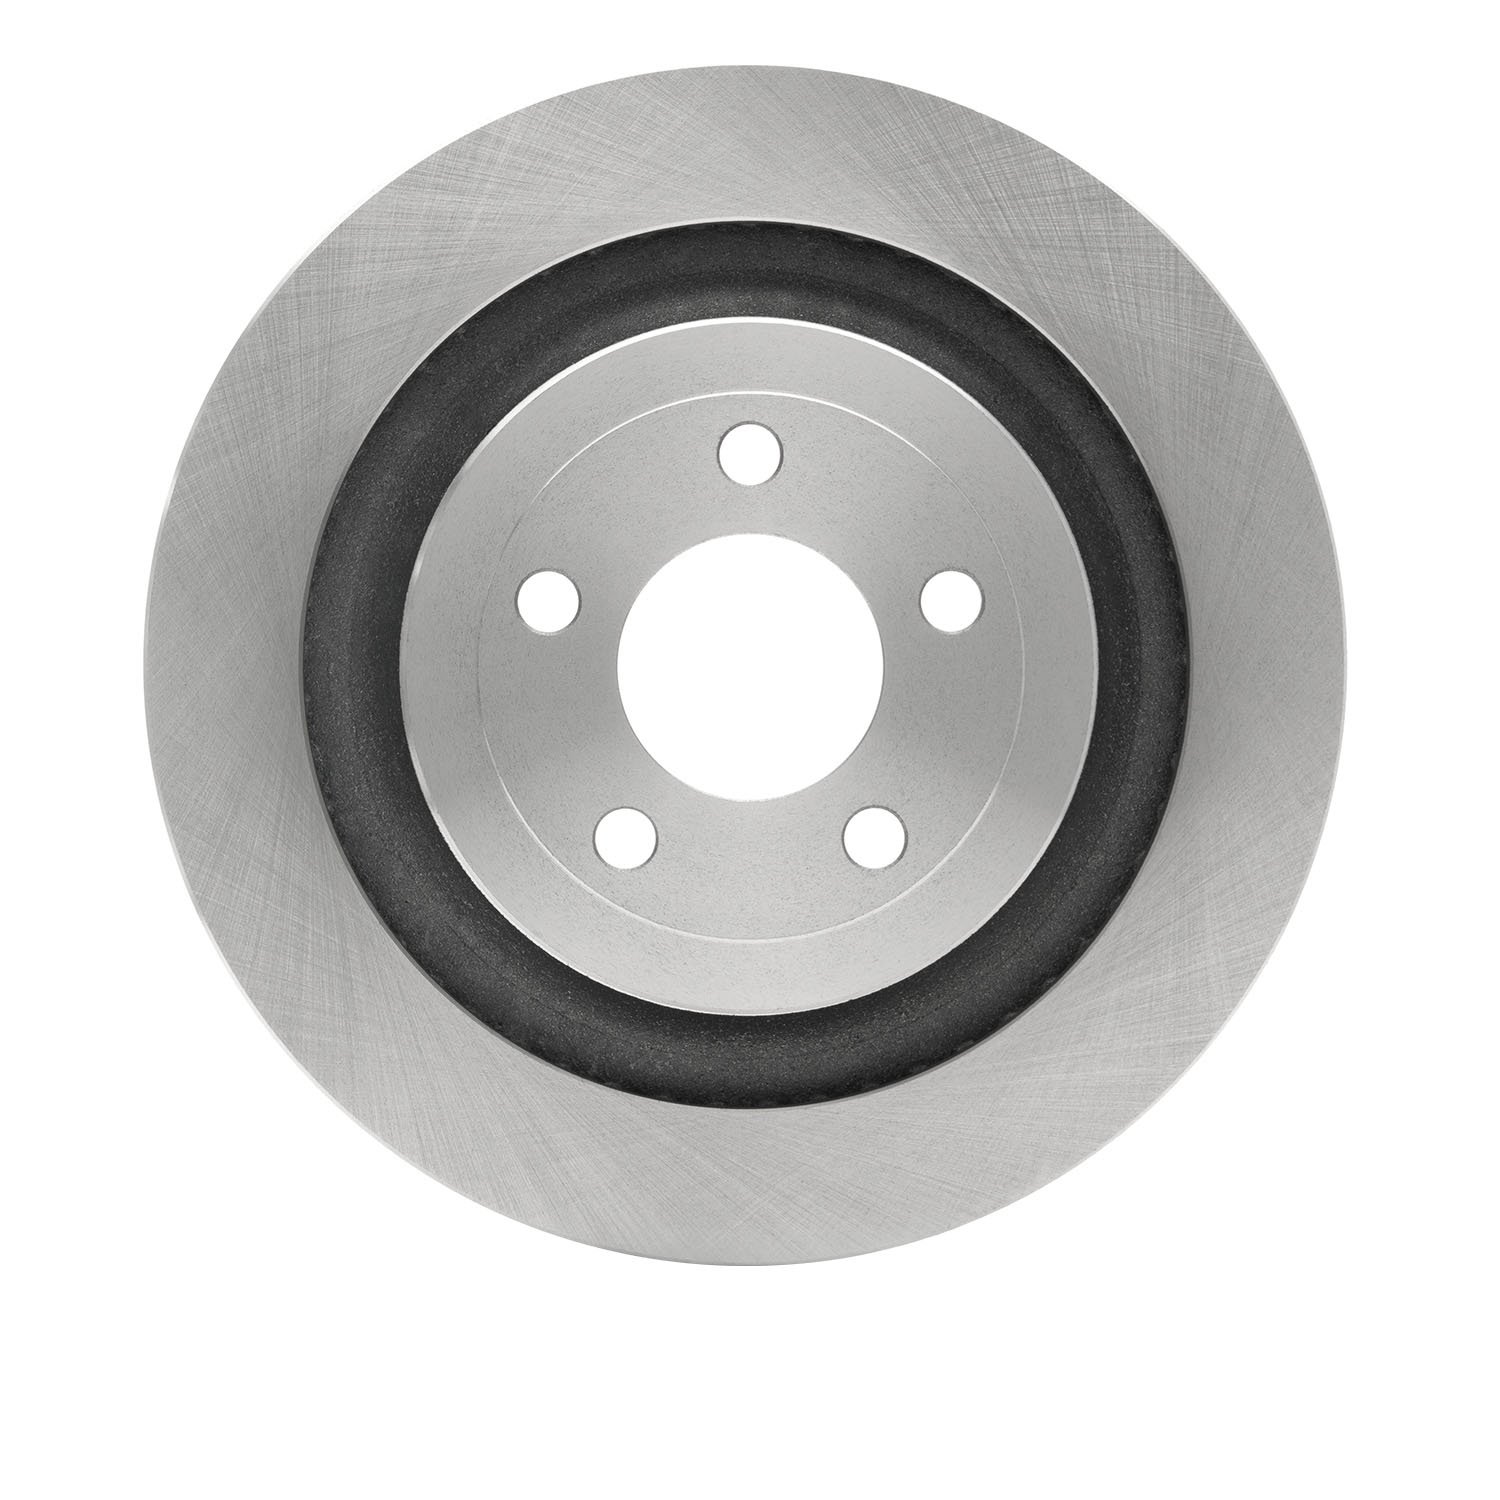 600-54074 Brake Rotor, Fits Select Ford/Lincoln/Mercury/Mazda, Position: Rear